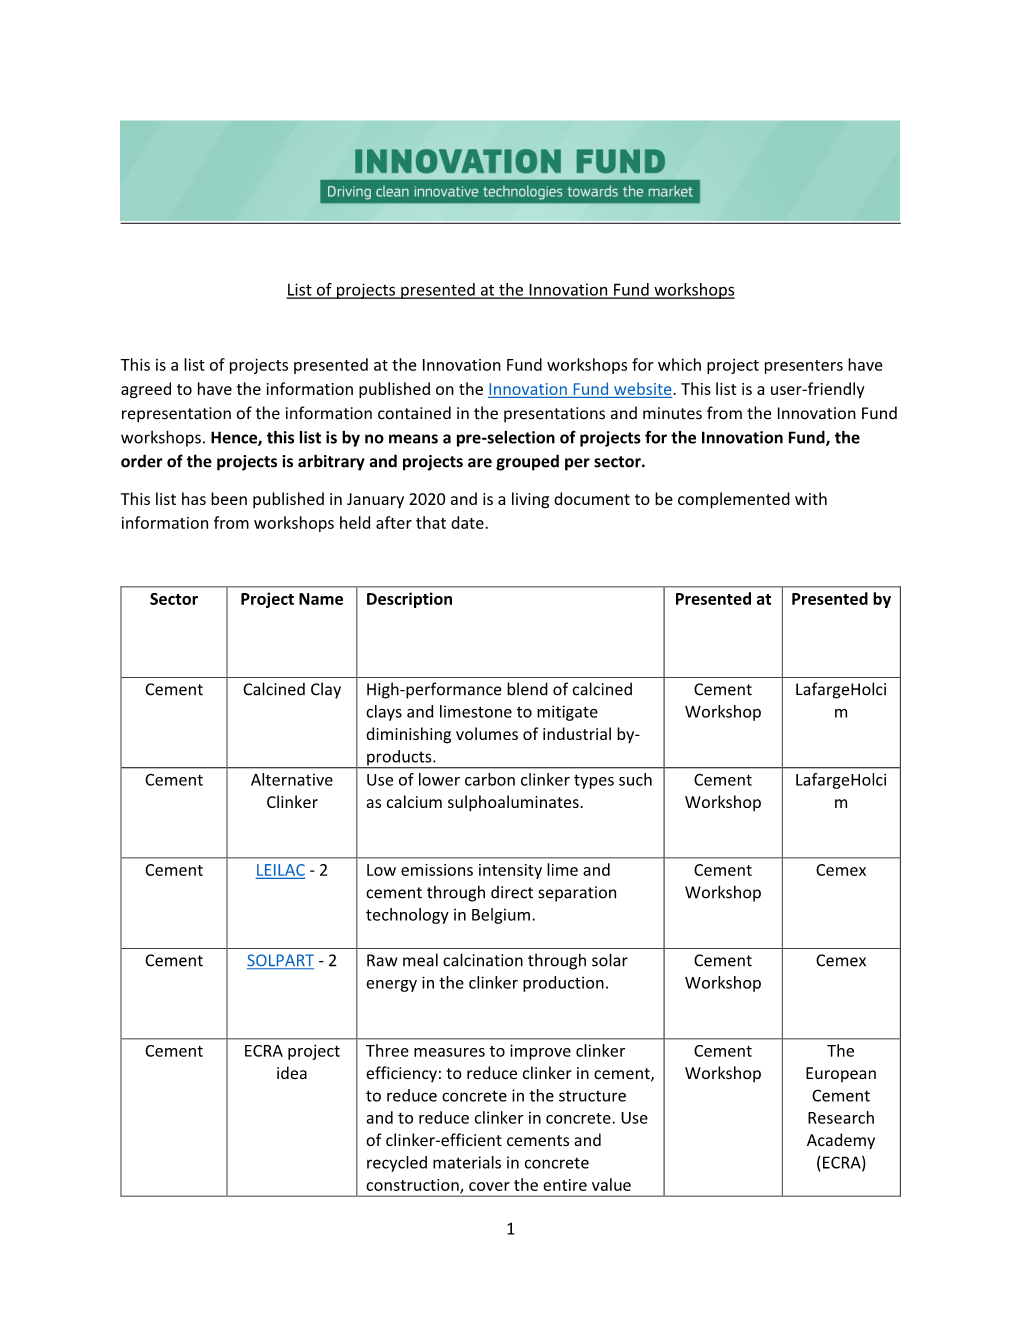 List of Projects Presented at the Innovation Fund Workshops